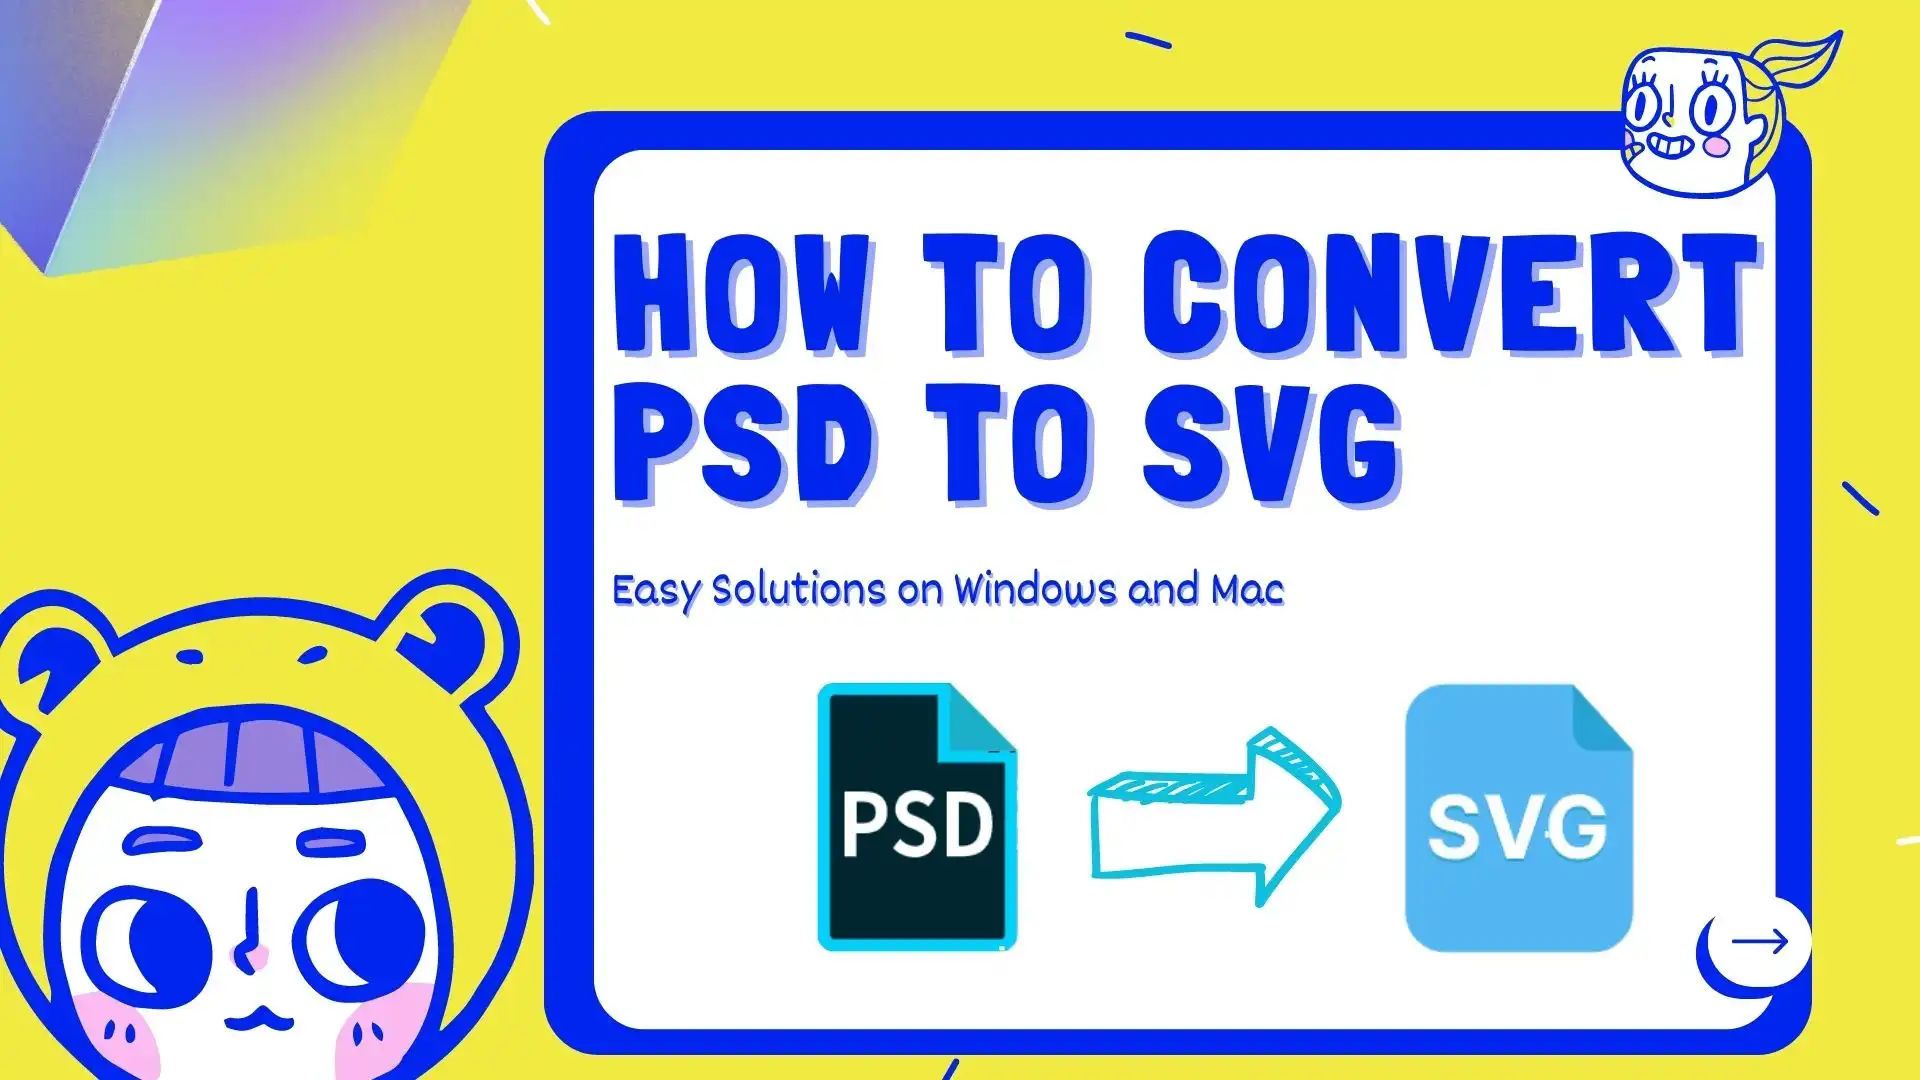 Easy Solutions | How to Convert PSD to SVG on Windows and Mac